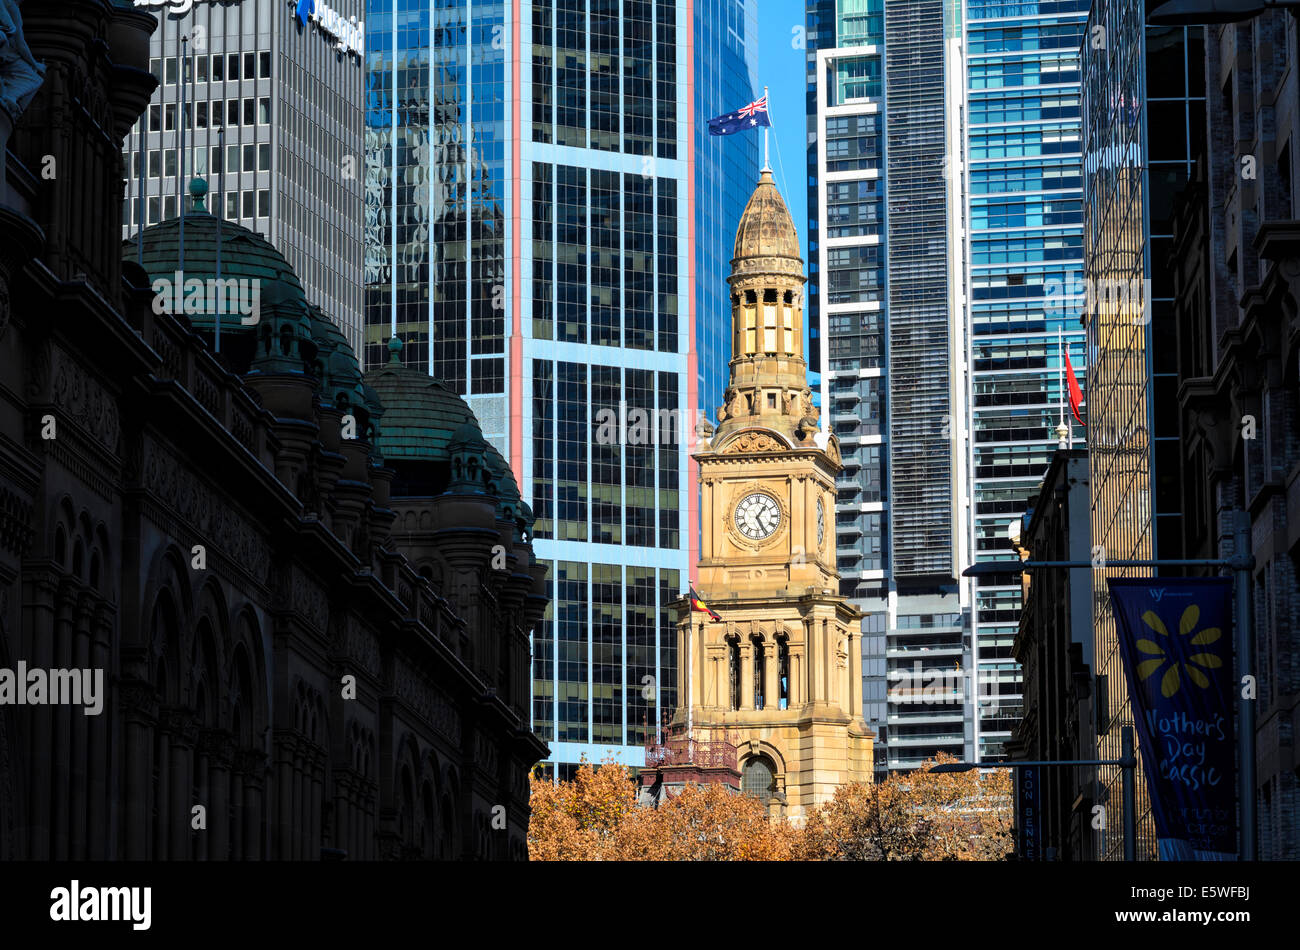 Contrasts between traditional sandstone architecture of Sydney's Town Hall and the modern skyscrapers behind. Sydney, Australia. Stock Photo